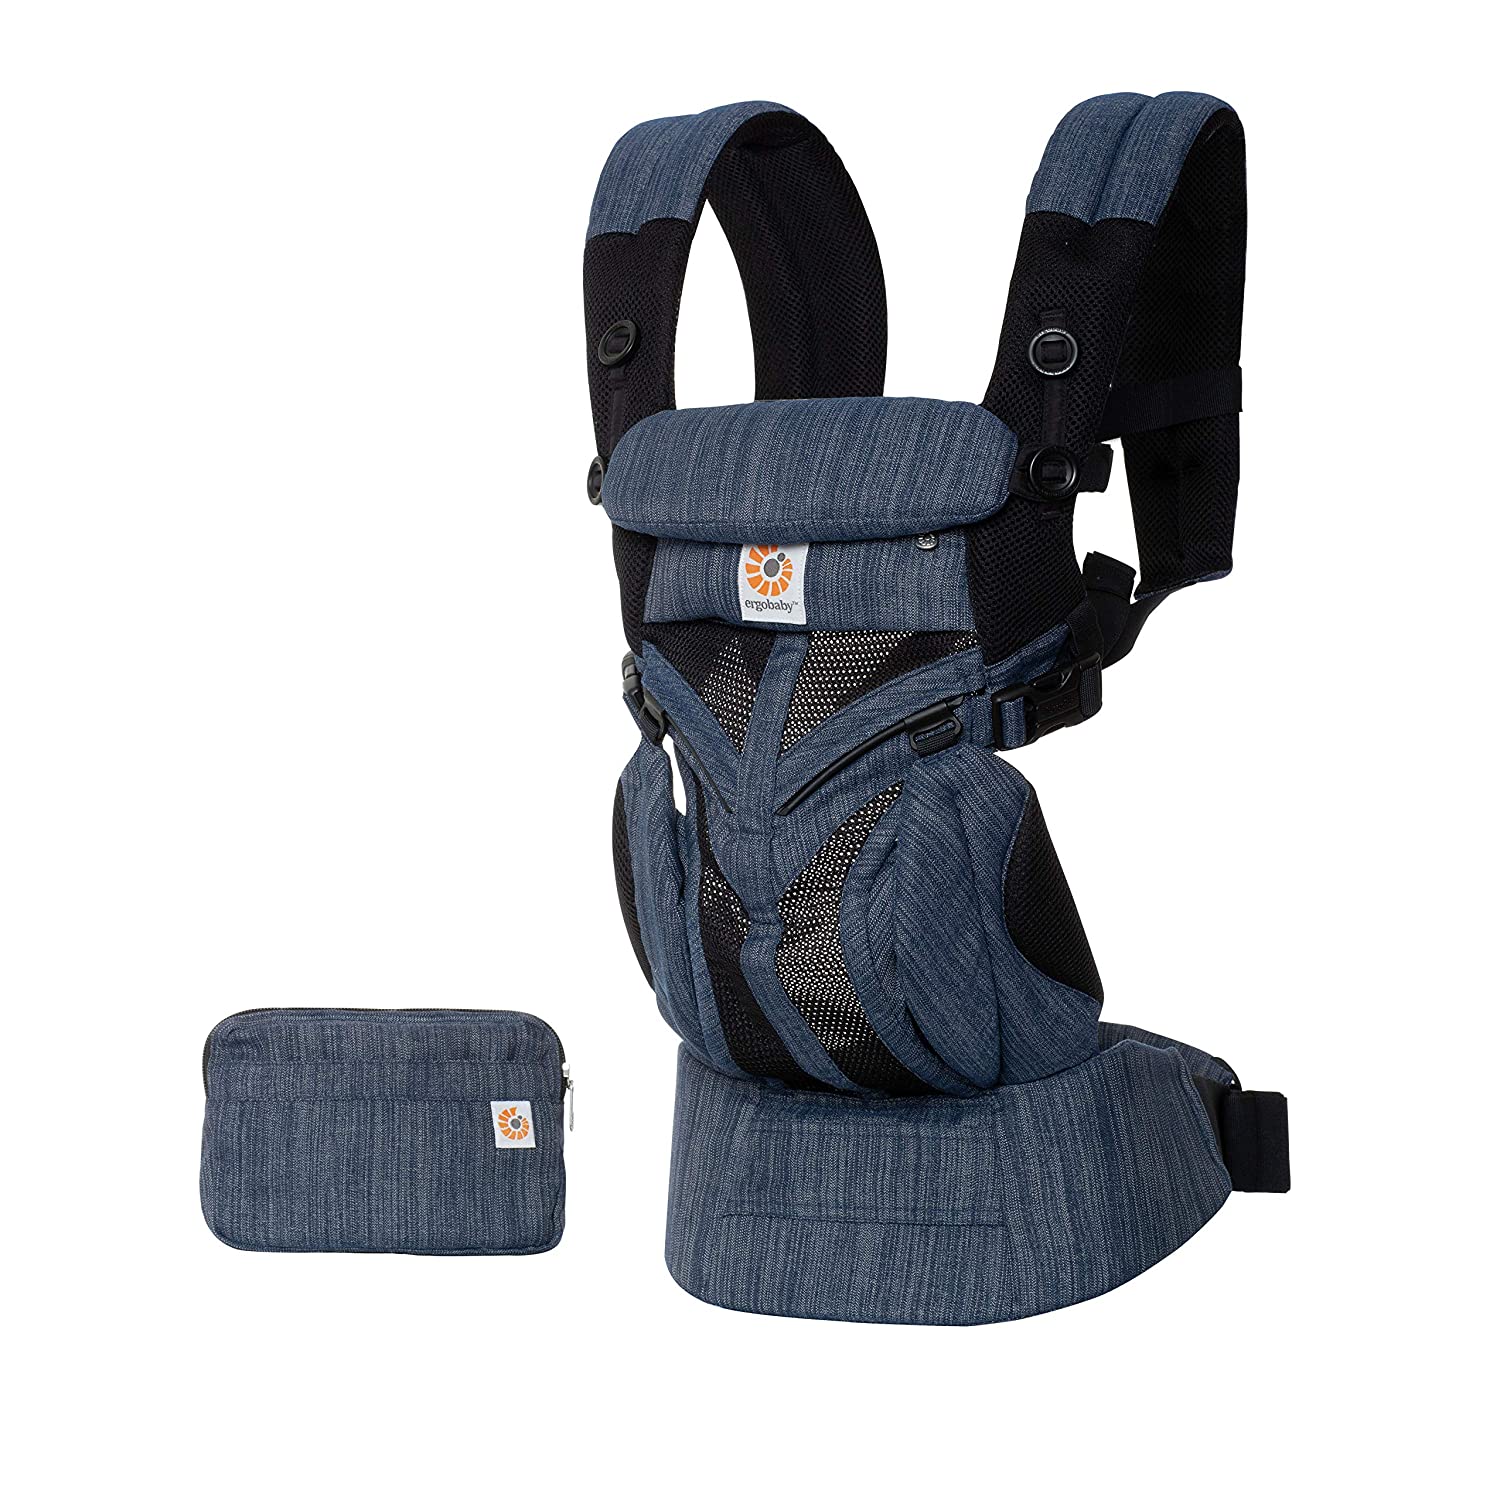 Ergobaby baby carrier for newborns from birth up to 20 kg, 4-in-1 Omni 360 Cool Air Mesh Indigo Blue Weave, child carrier carrier system